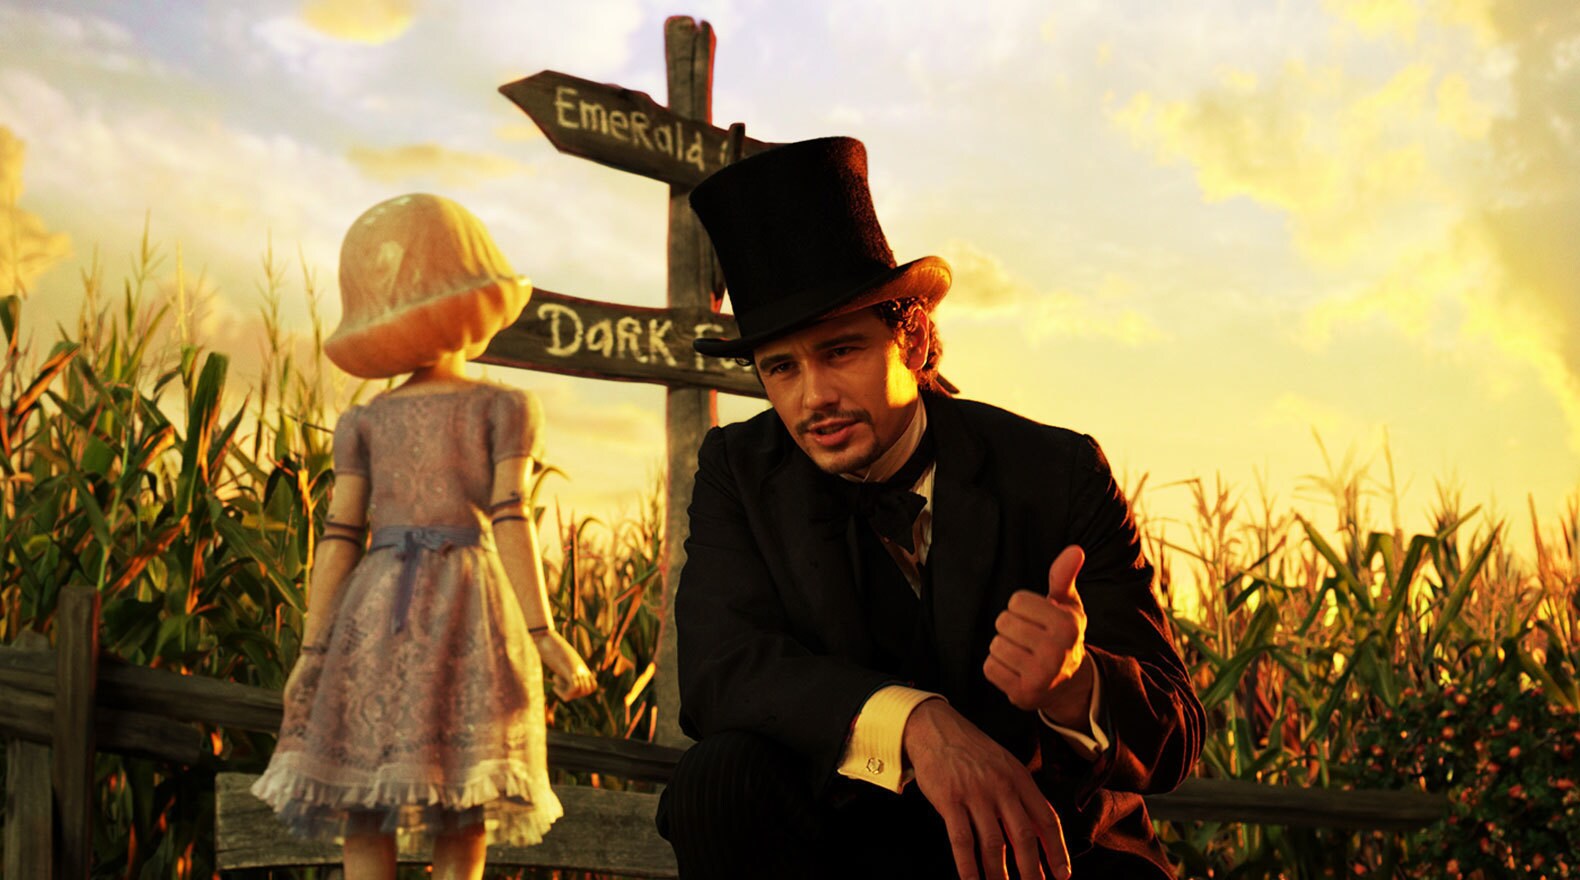 James Franco and Joey King in "Oz the Great and Powerful"